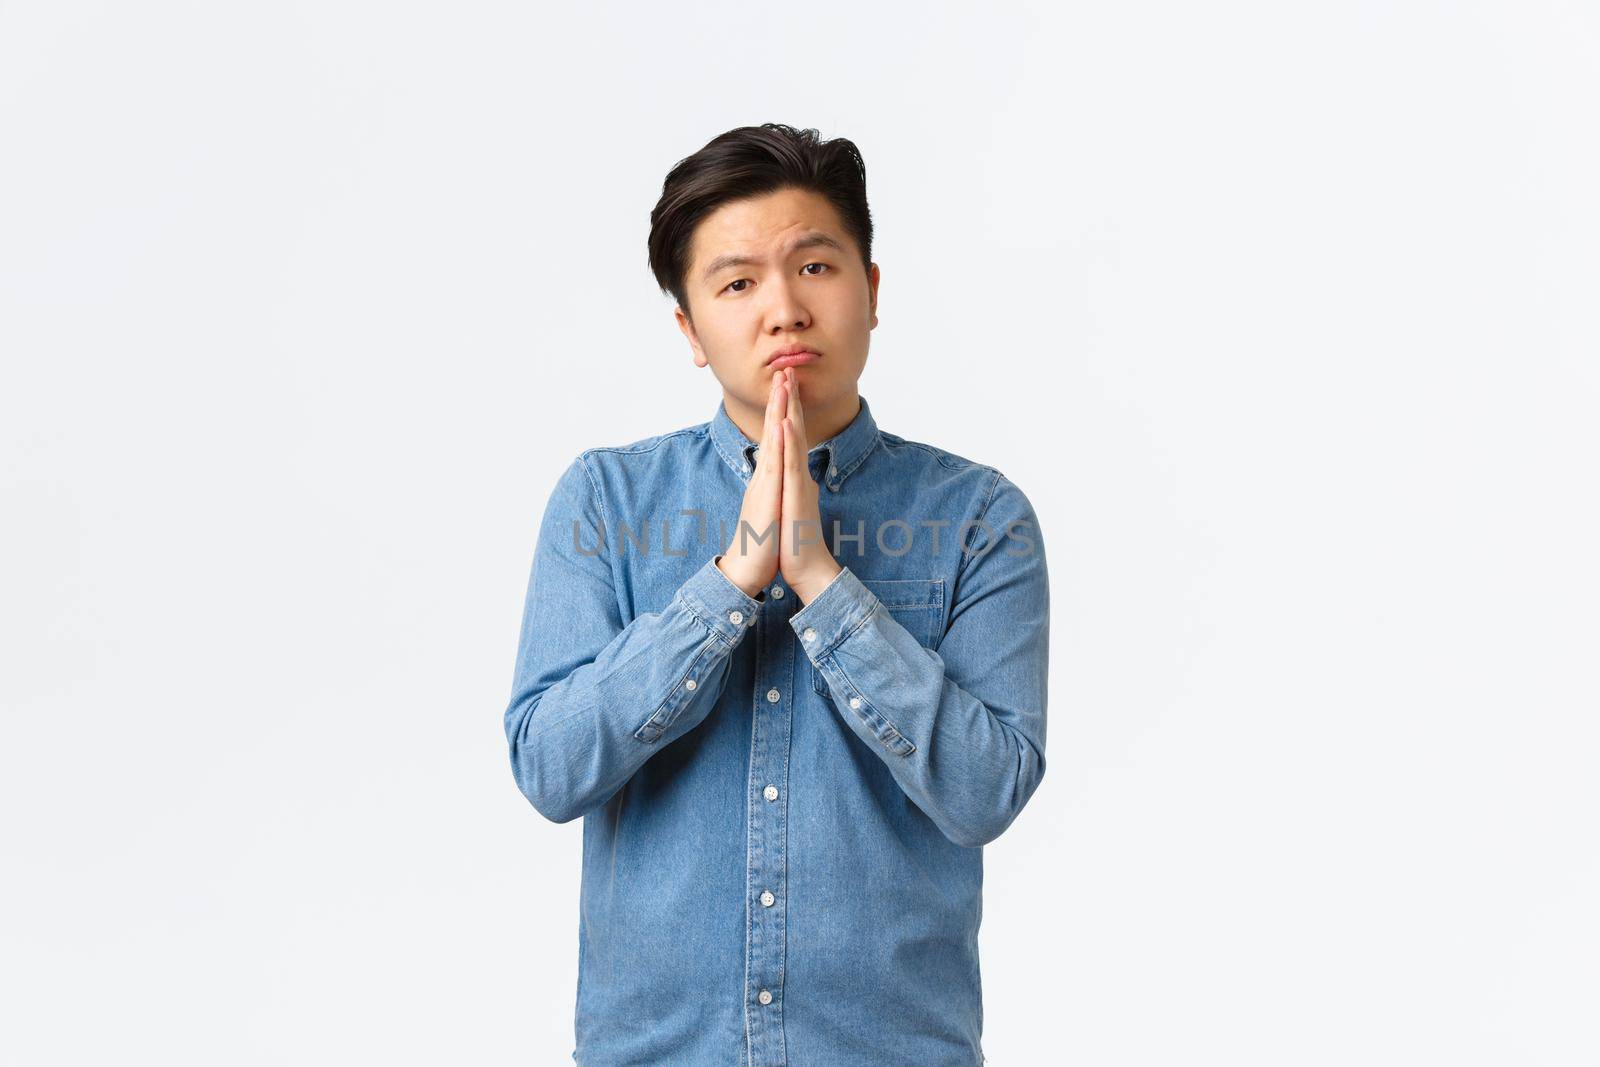 Sad gloomy asian male asking for help, begging favour, standing over white background and hold hands together in plead, supplicating, lending money from friend, apoligizing.